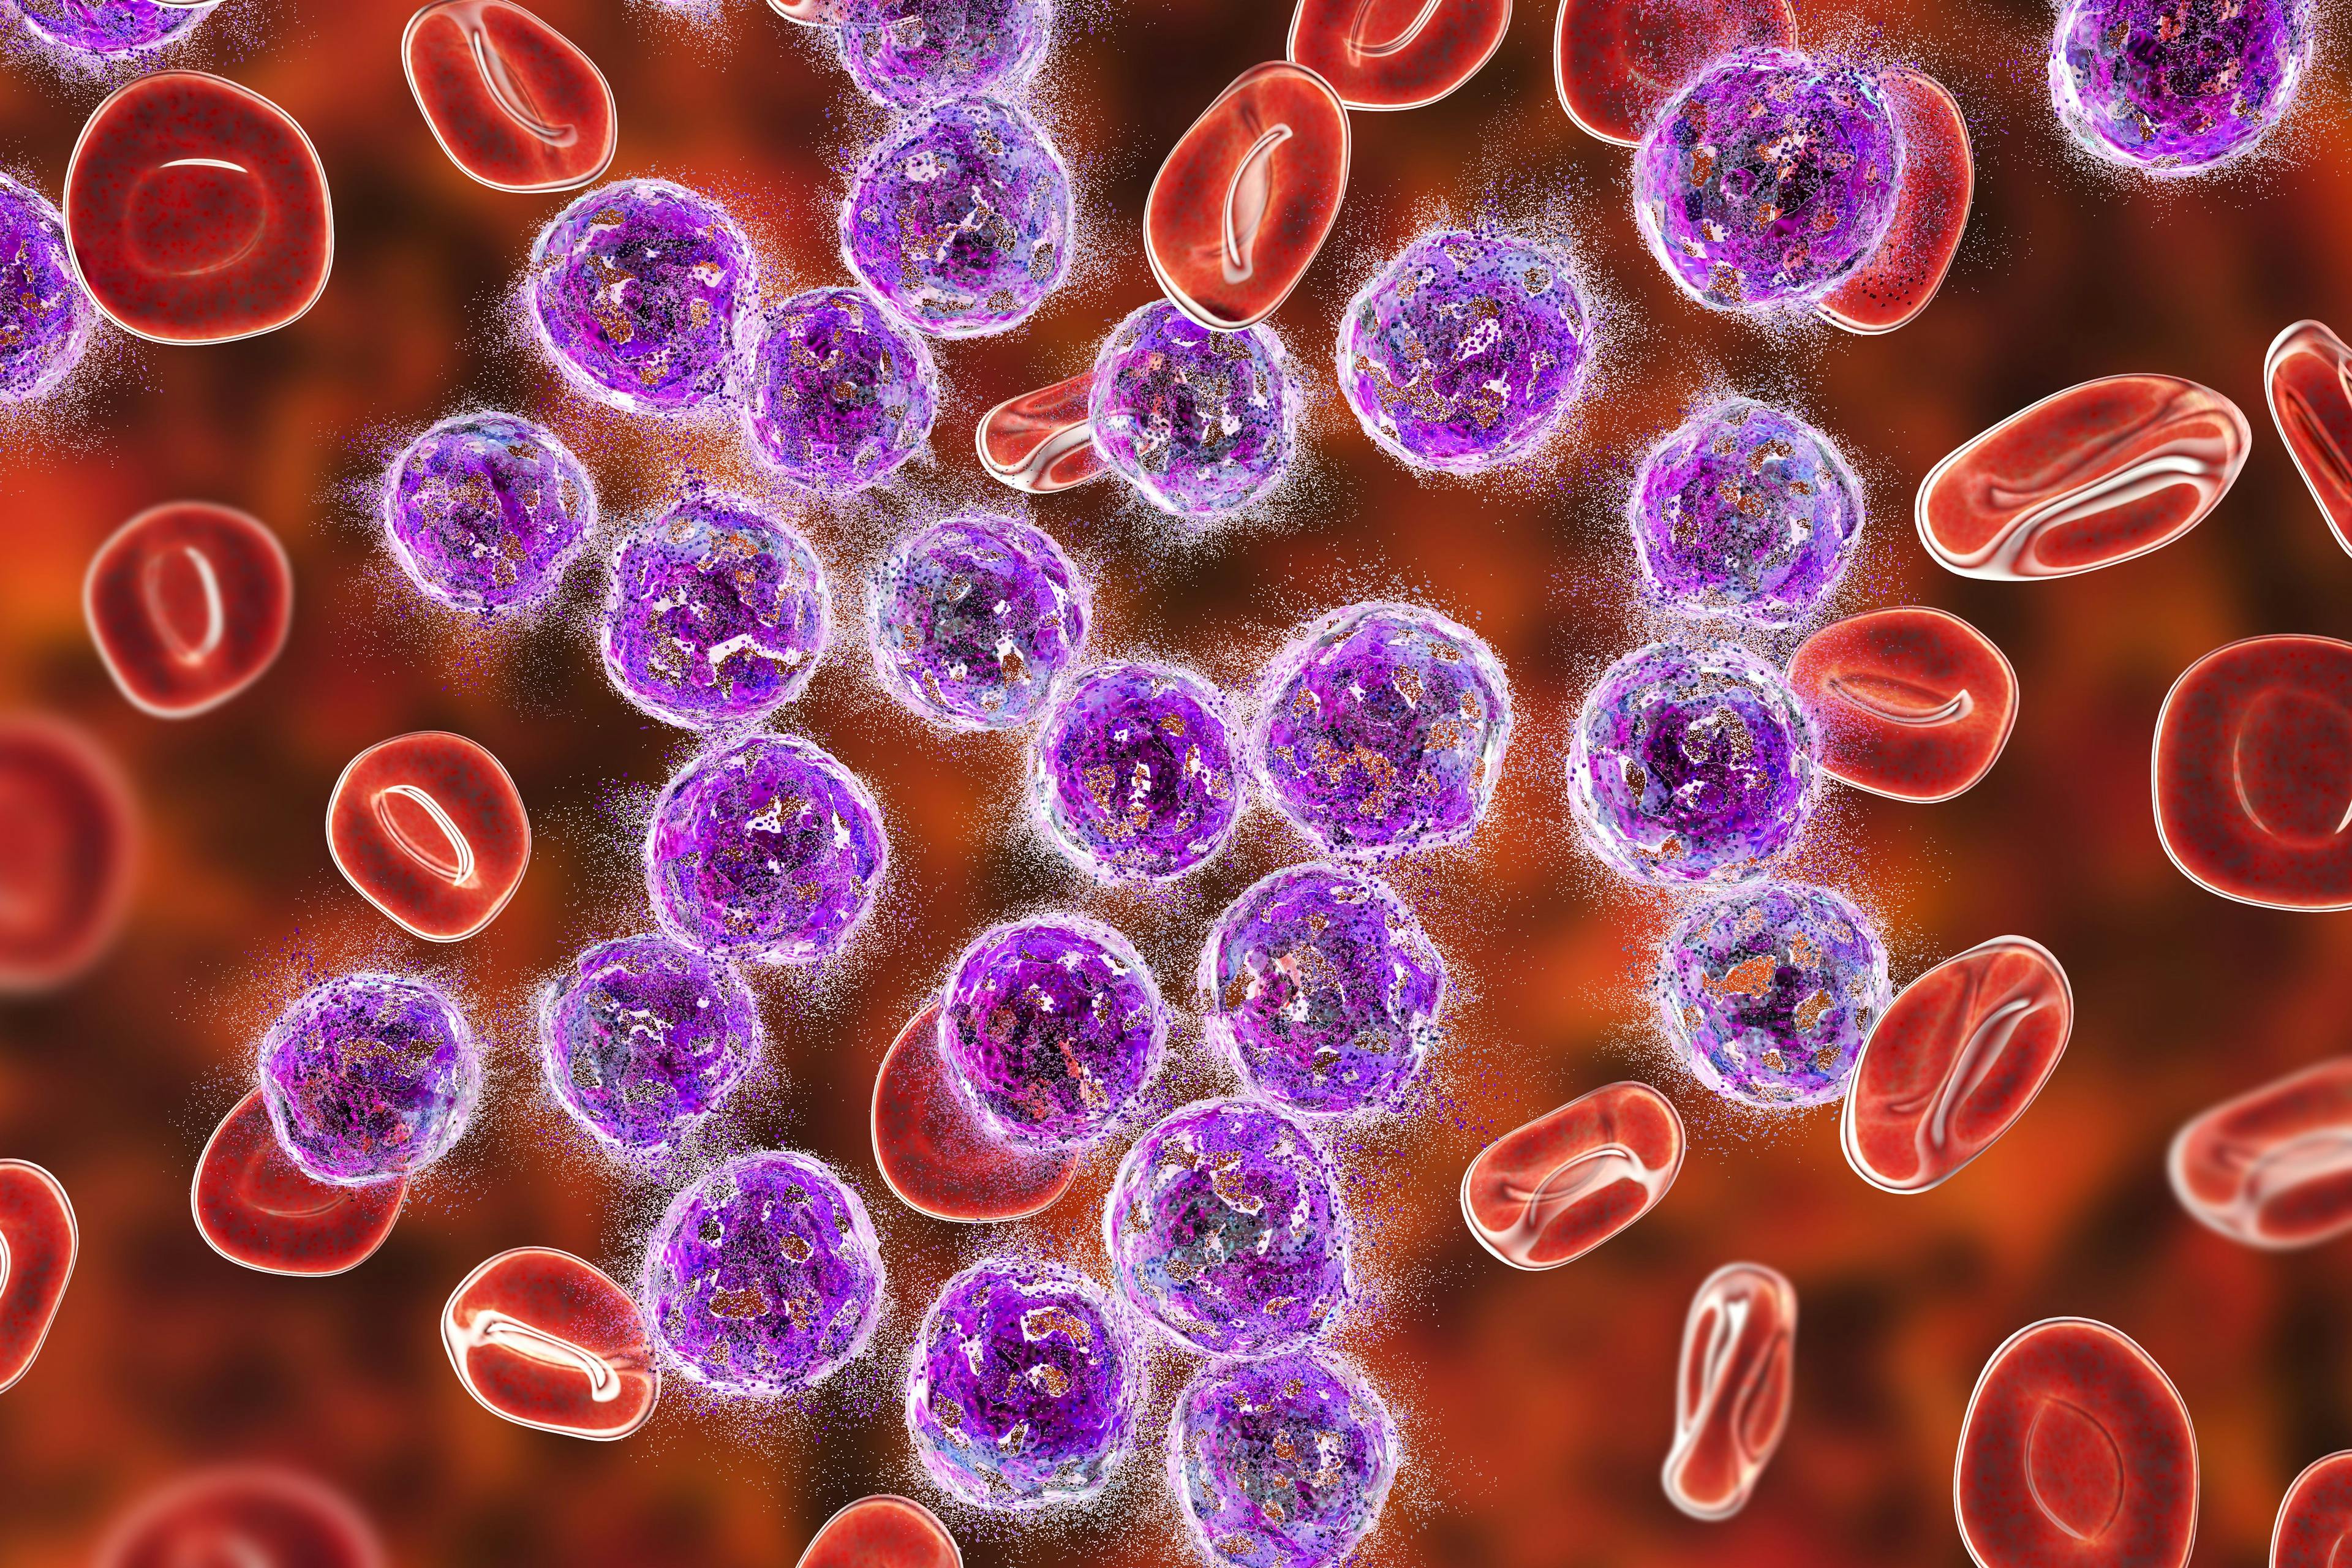 Investigators announced positive topline results for the phase 3 QuANTUM-First trial, assessing the use of quizartinib plus chemotherapy for adult patients with newly diagnosed FLT3-ITD–positive acute myeloid leukemia.